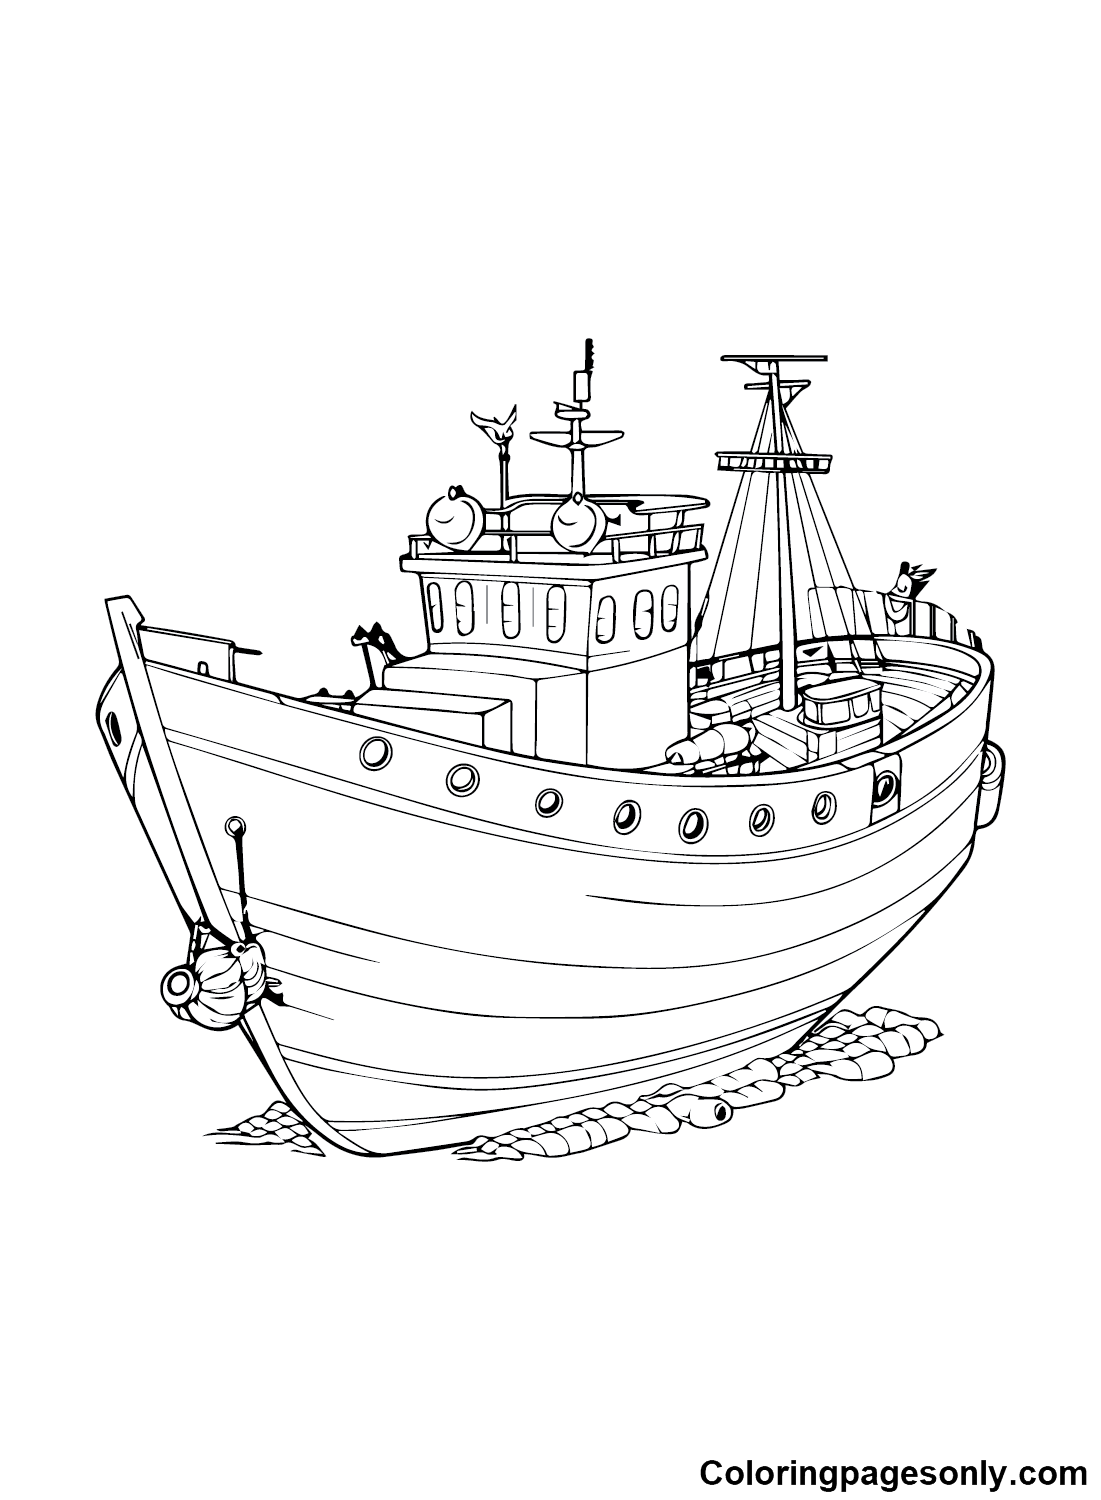 Printable Ship Coloring Pages